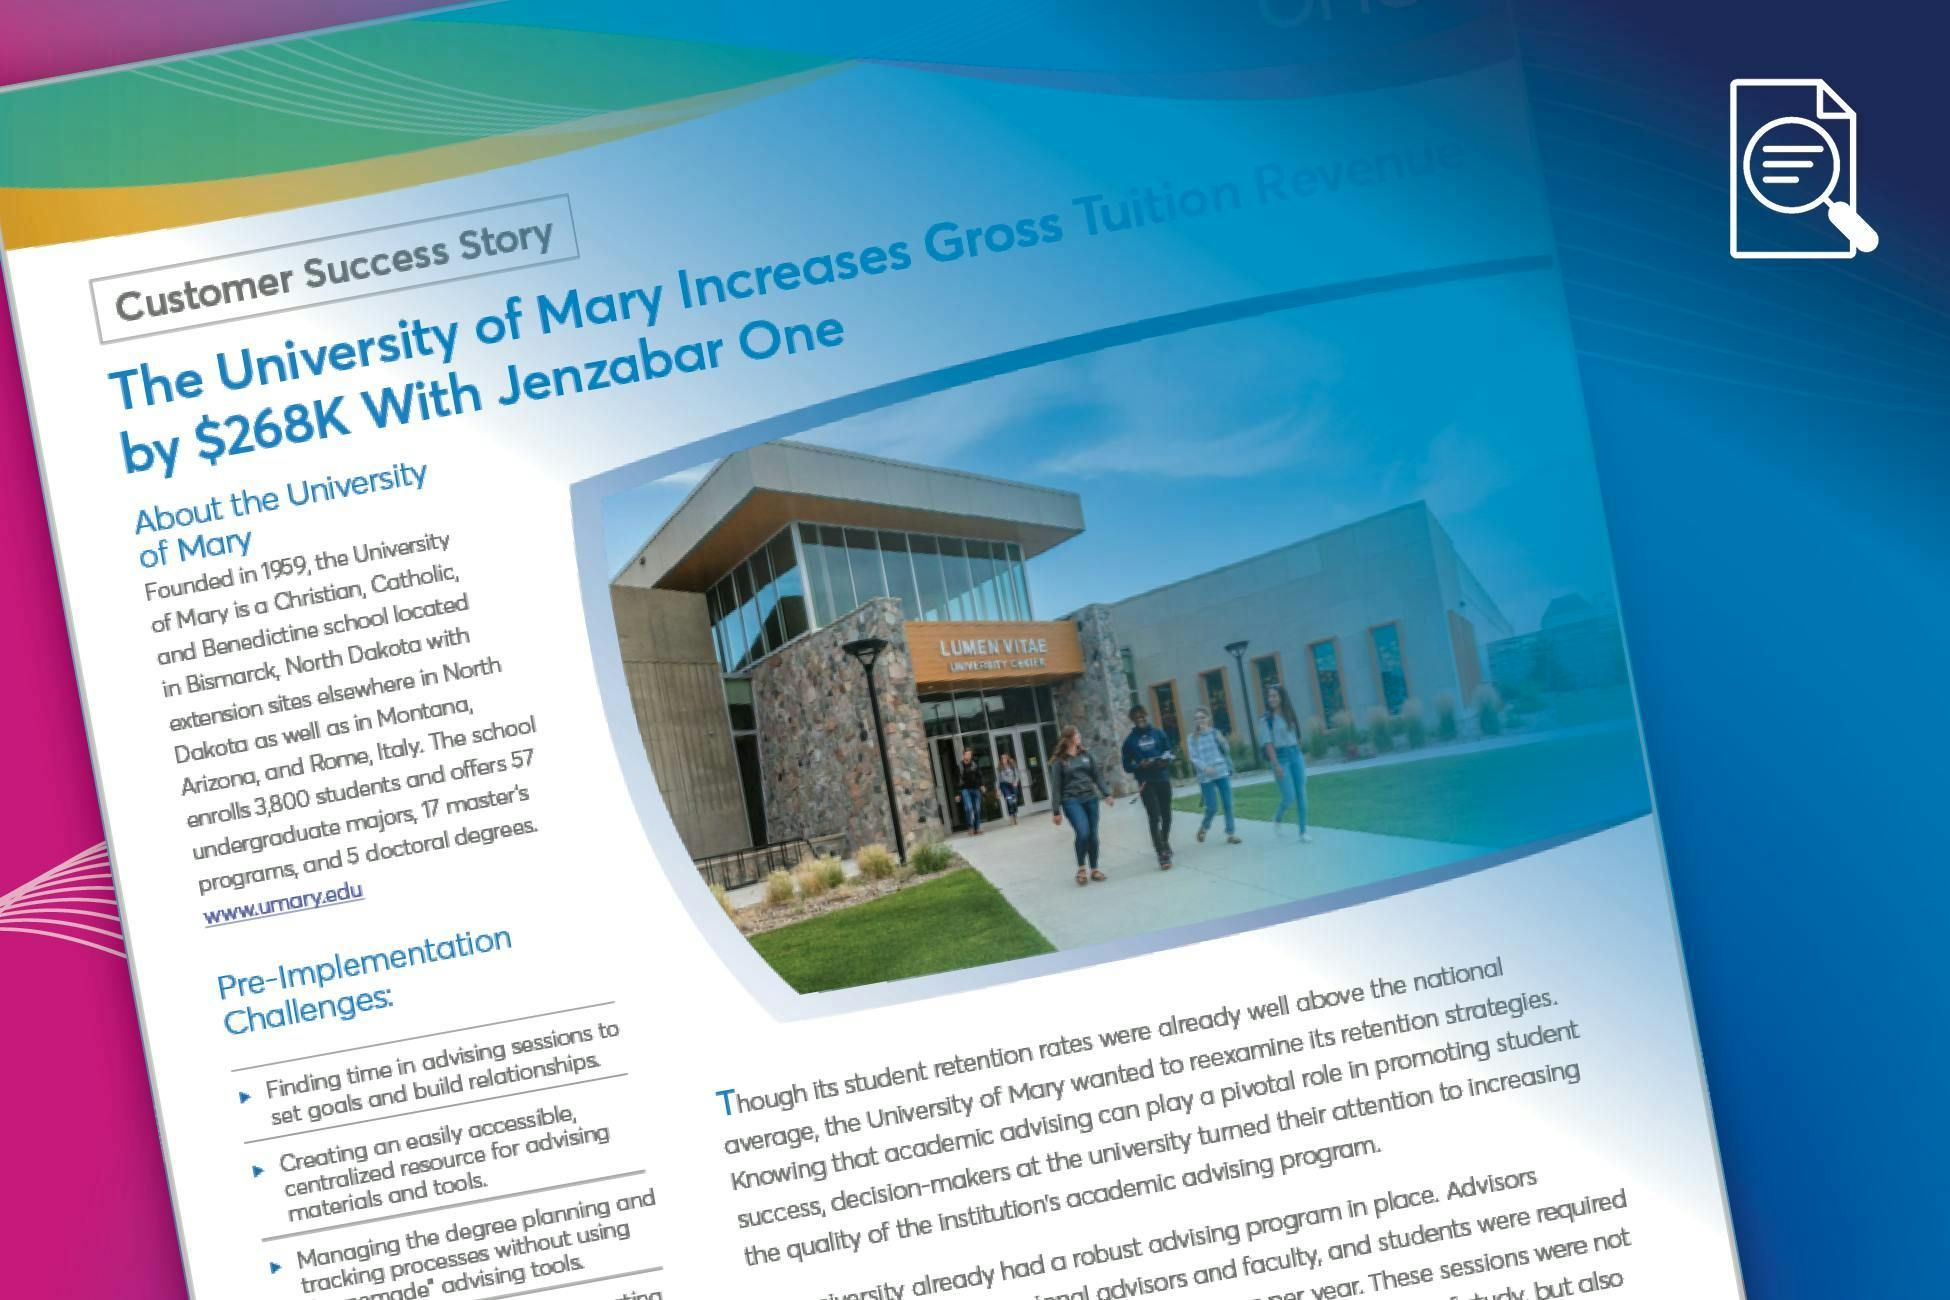 Case Study: The University of Mary Increases Gross Tuition Revenue by $268K With Jenzabar One